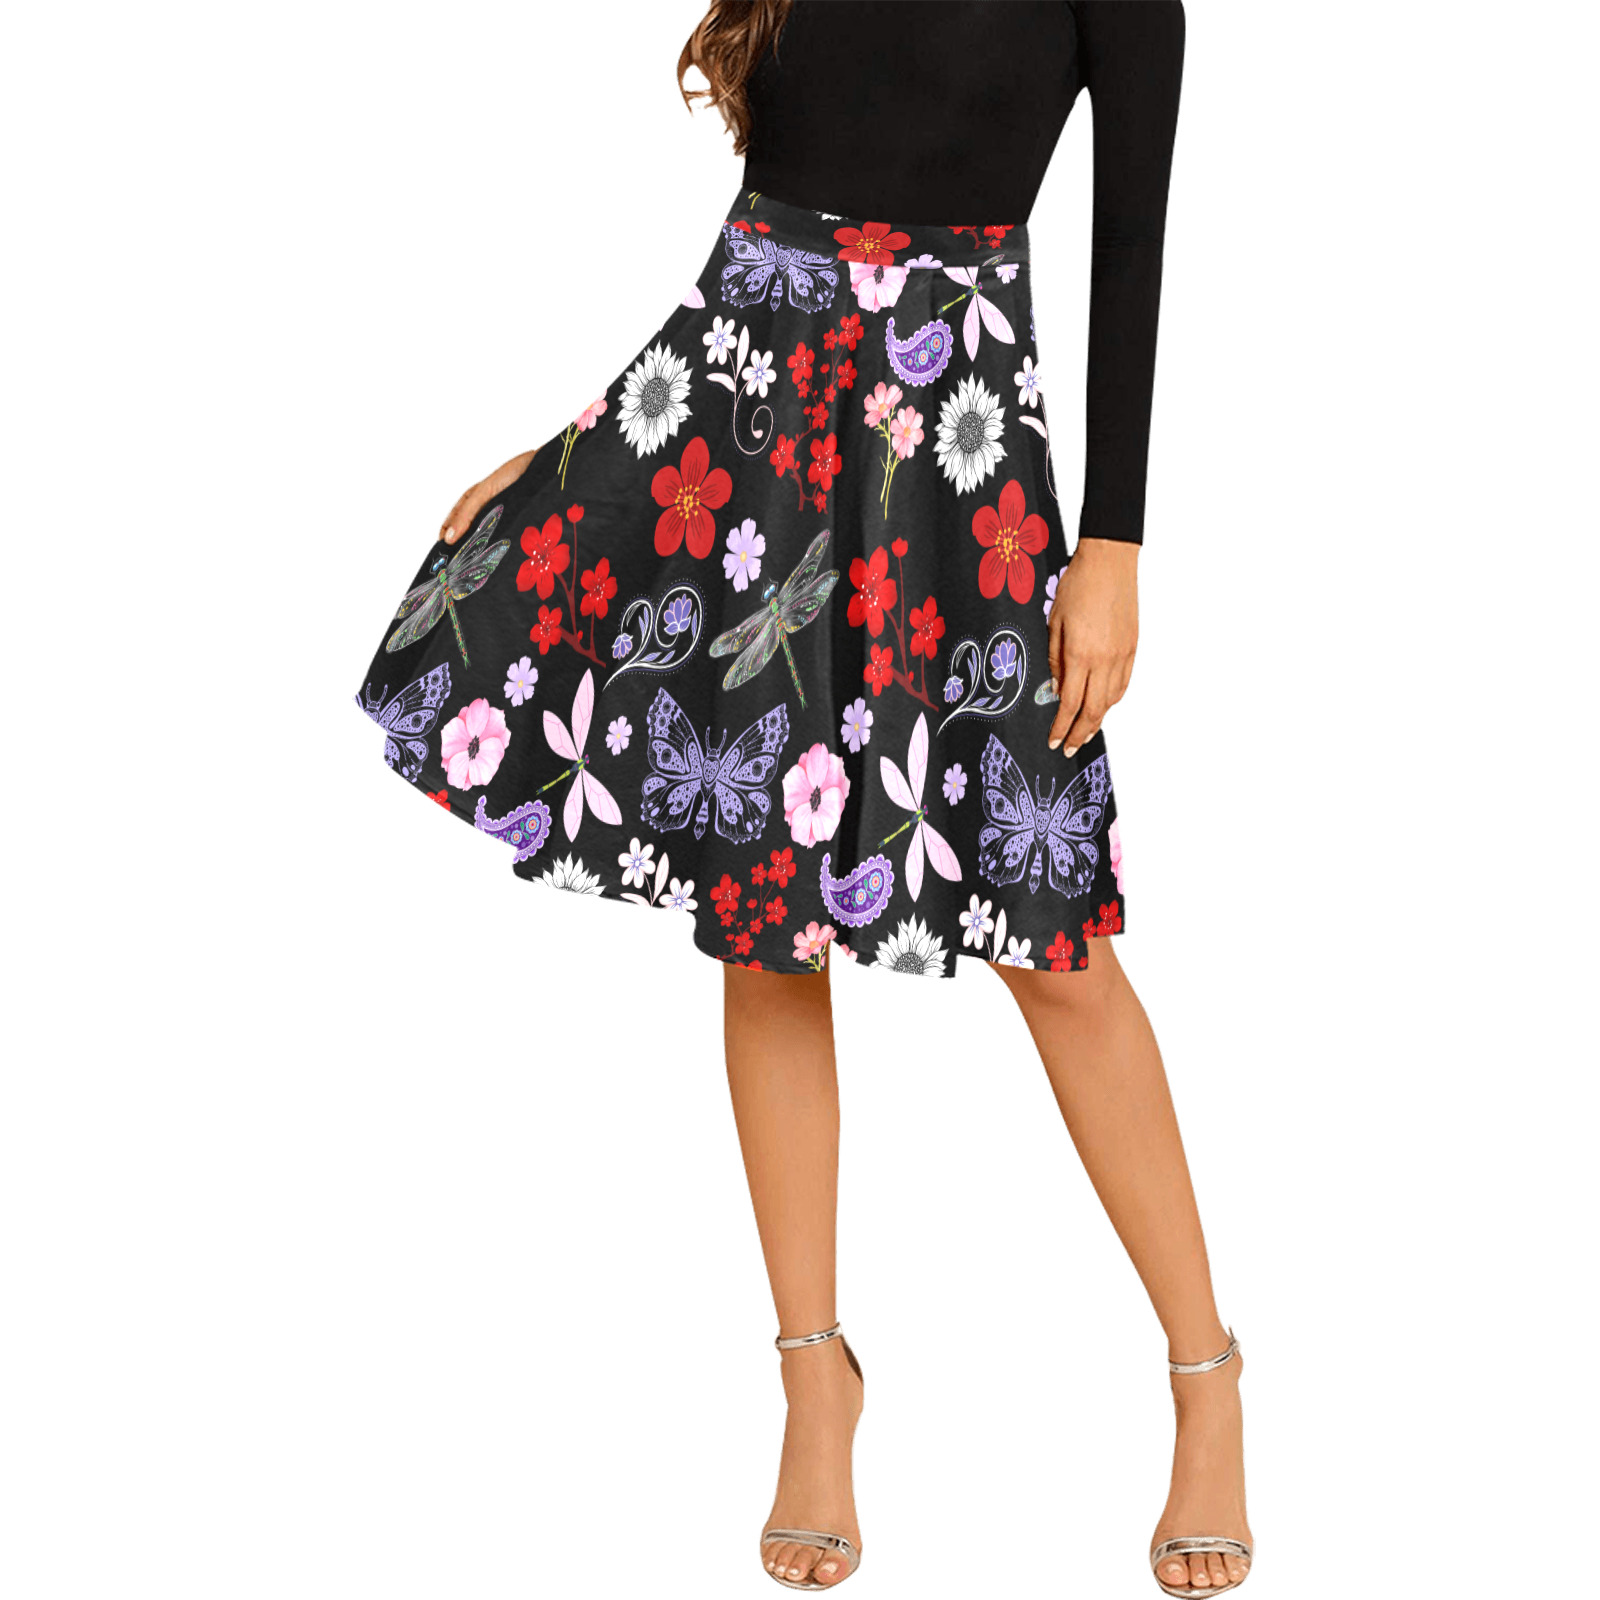 Black, Red, Pink, Purple, Dragonflies, Butterfly and Flowers Design Melete Pleated Midi Skirt (Model D15)